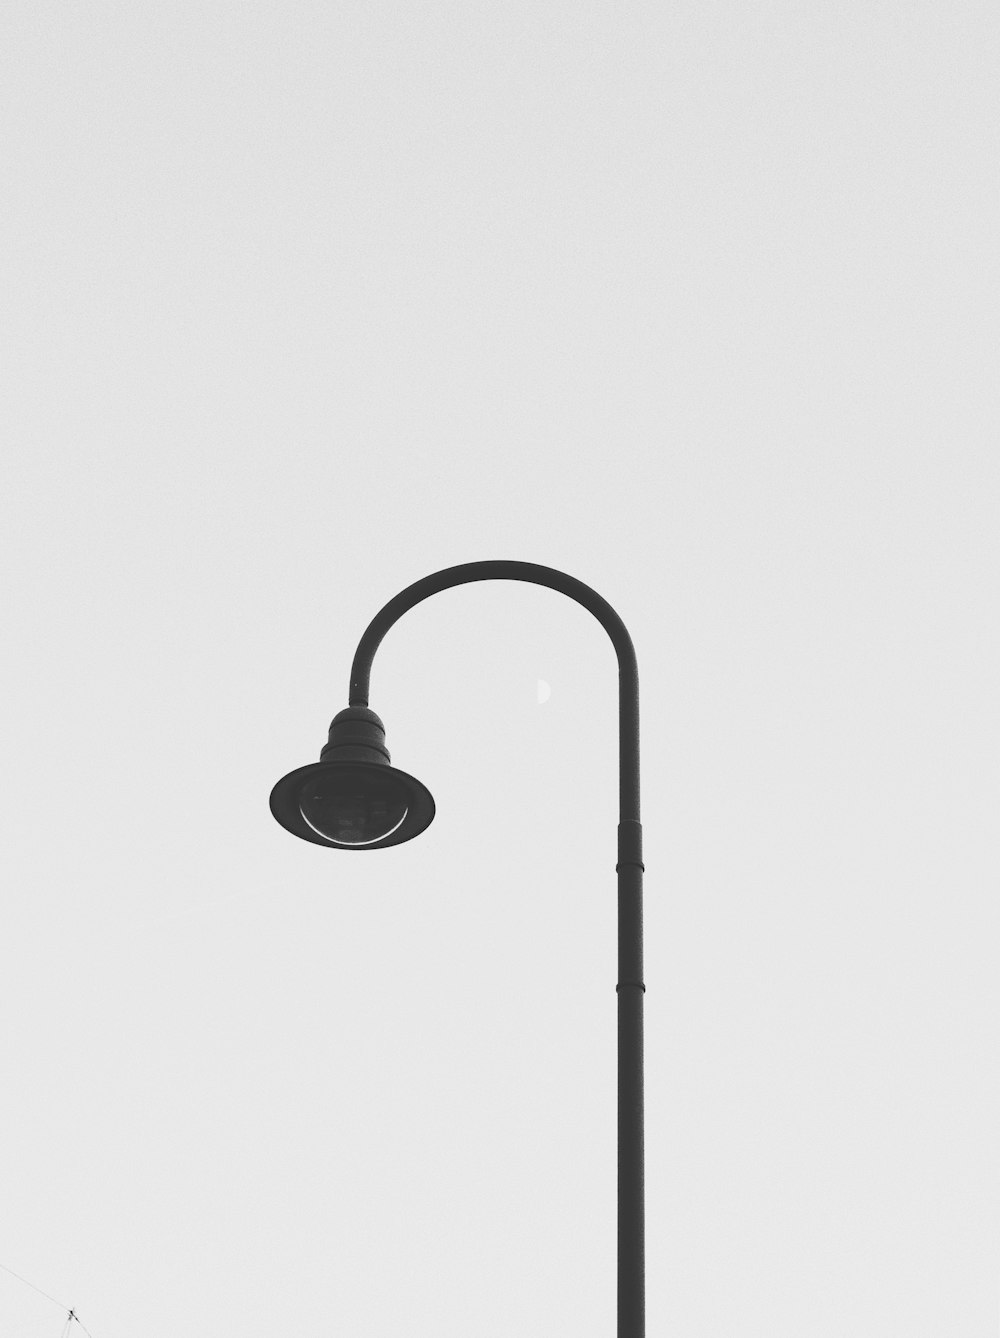 black steel lamp post with white background